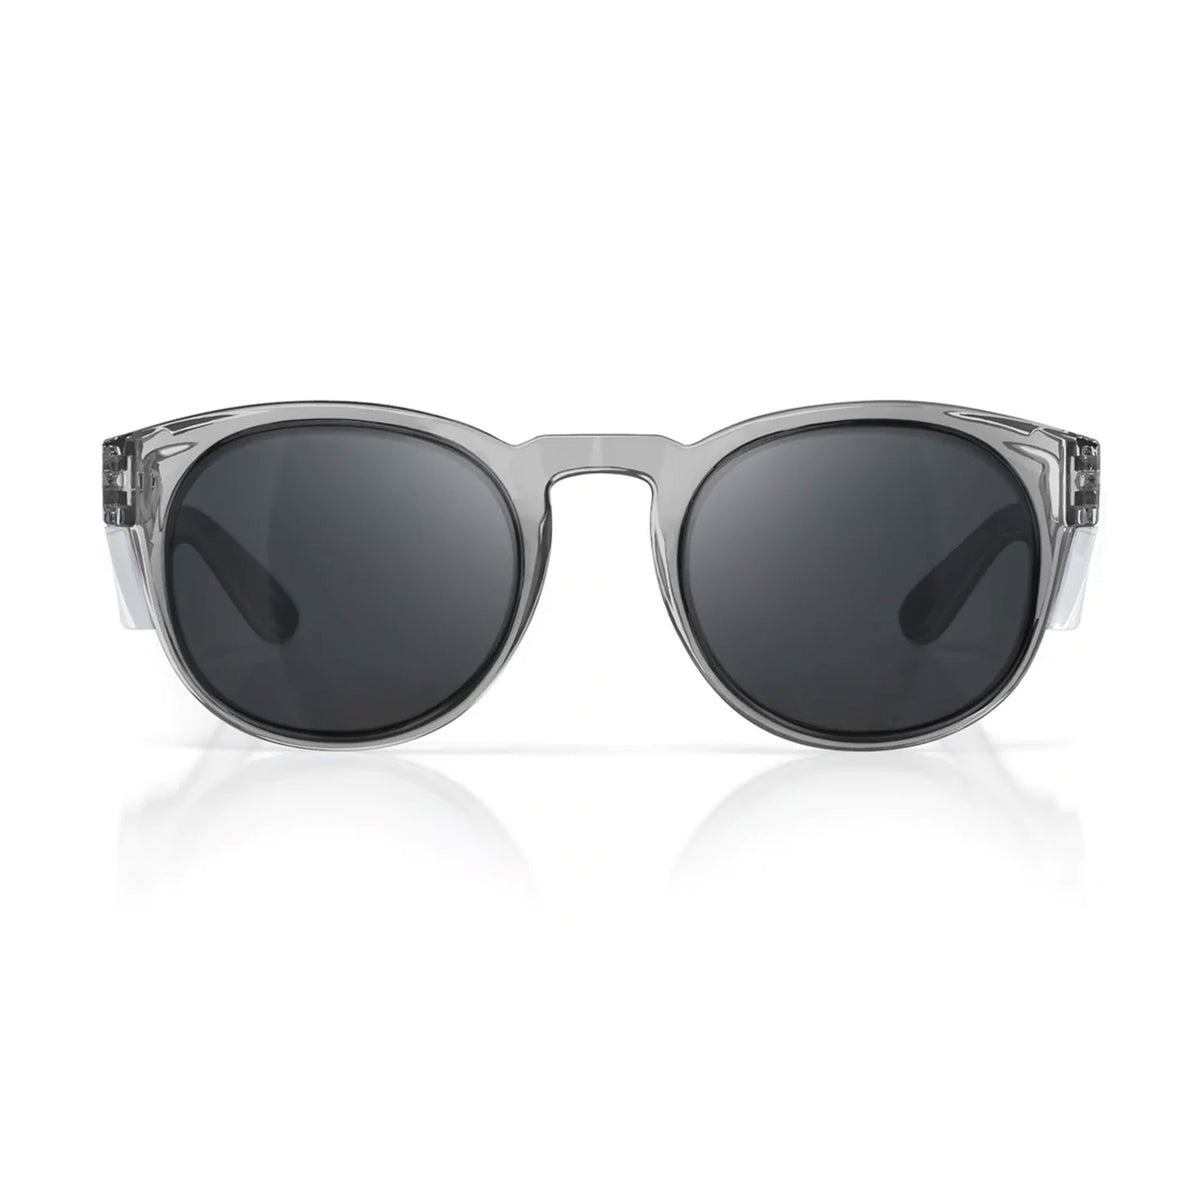 safestyle cruisers graphite frame with polarised lens